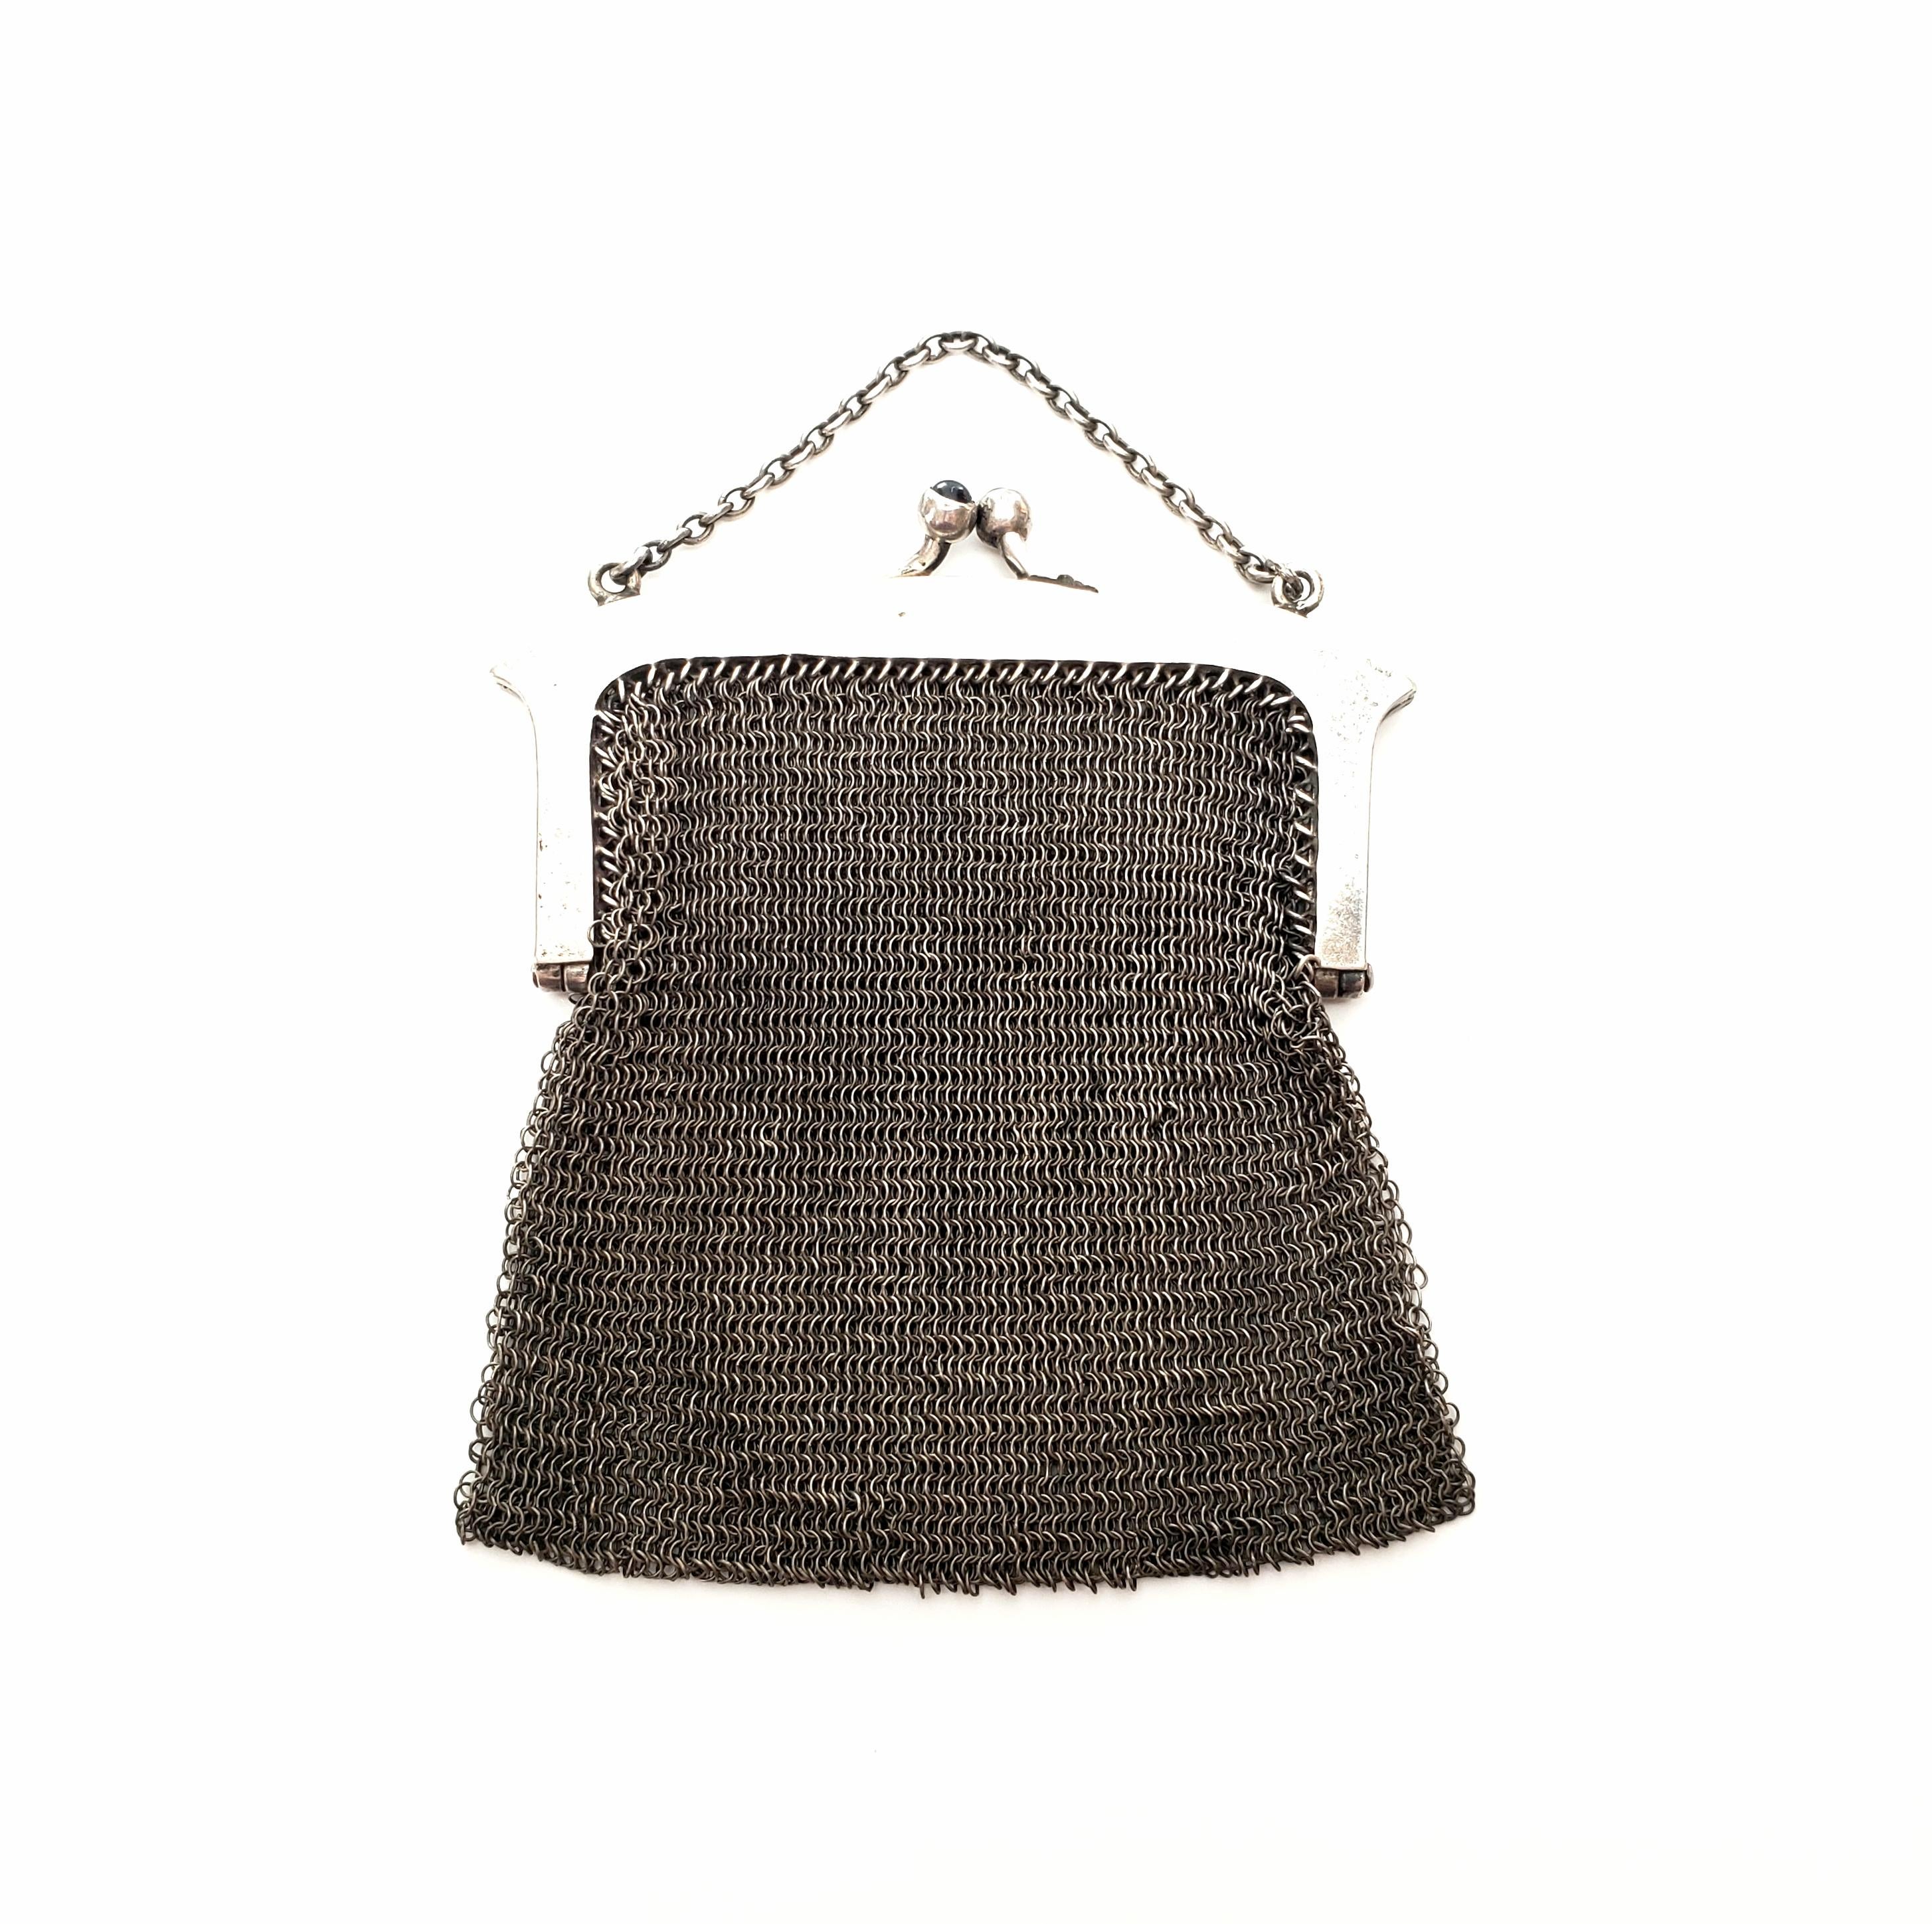 Antique sterling silver mesh coin purse with short chain strap by E.A. Bliss Co.

E.A. Bliss manufactured chains and novelties from 1878. They moved from MA to CT in 1890, renamed to Napier-Bliss in 1920, Napier in 1922 and closed in 1999. A